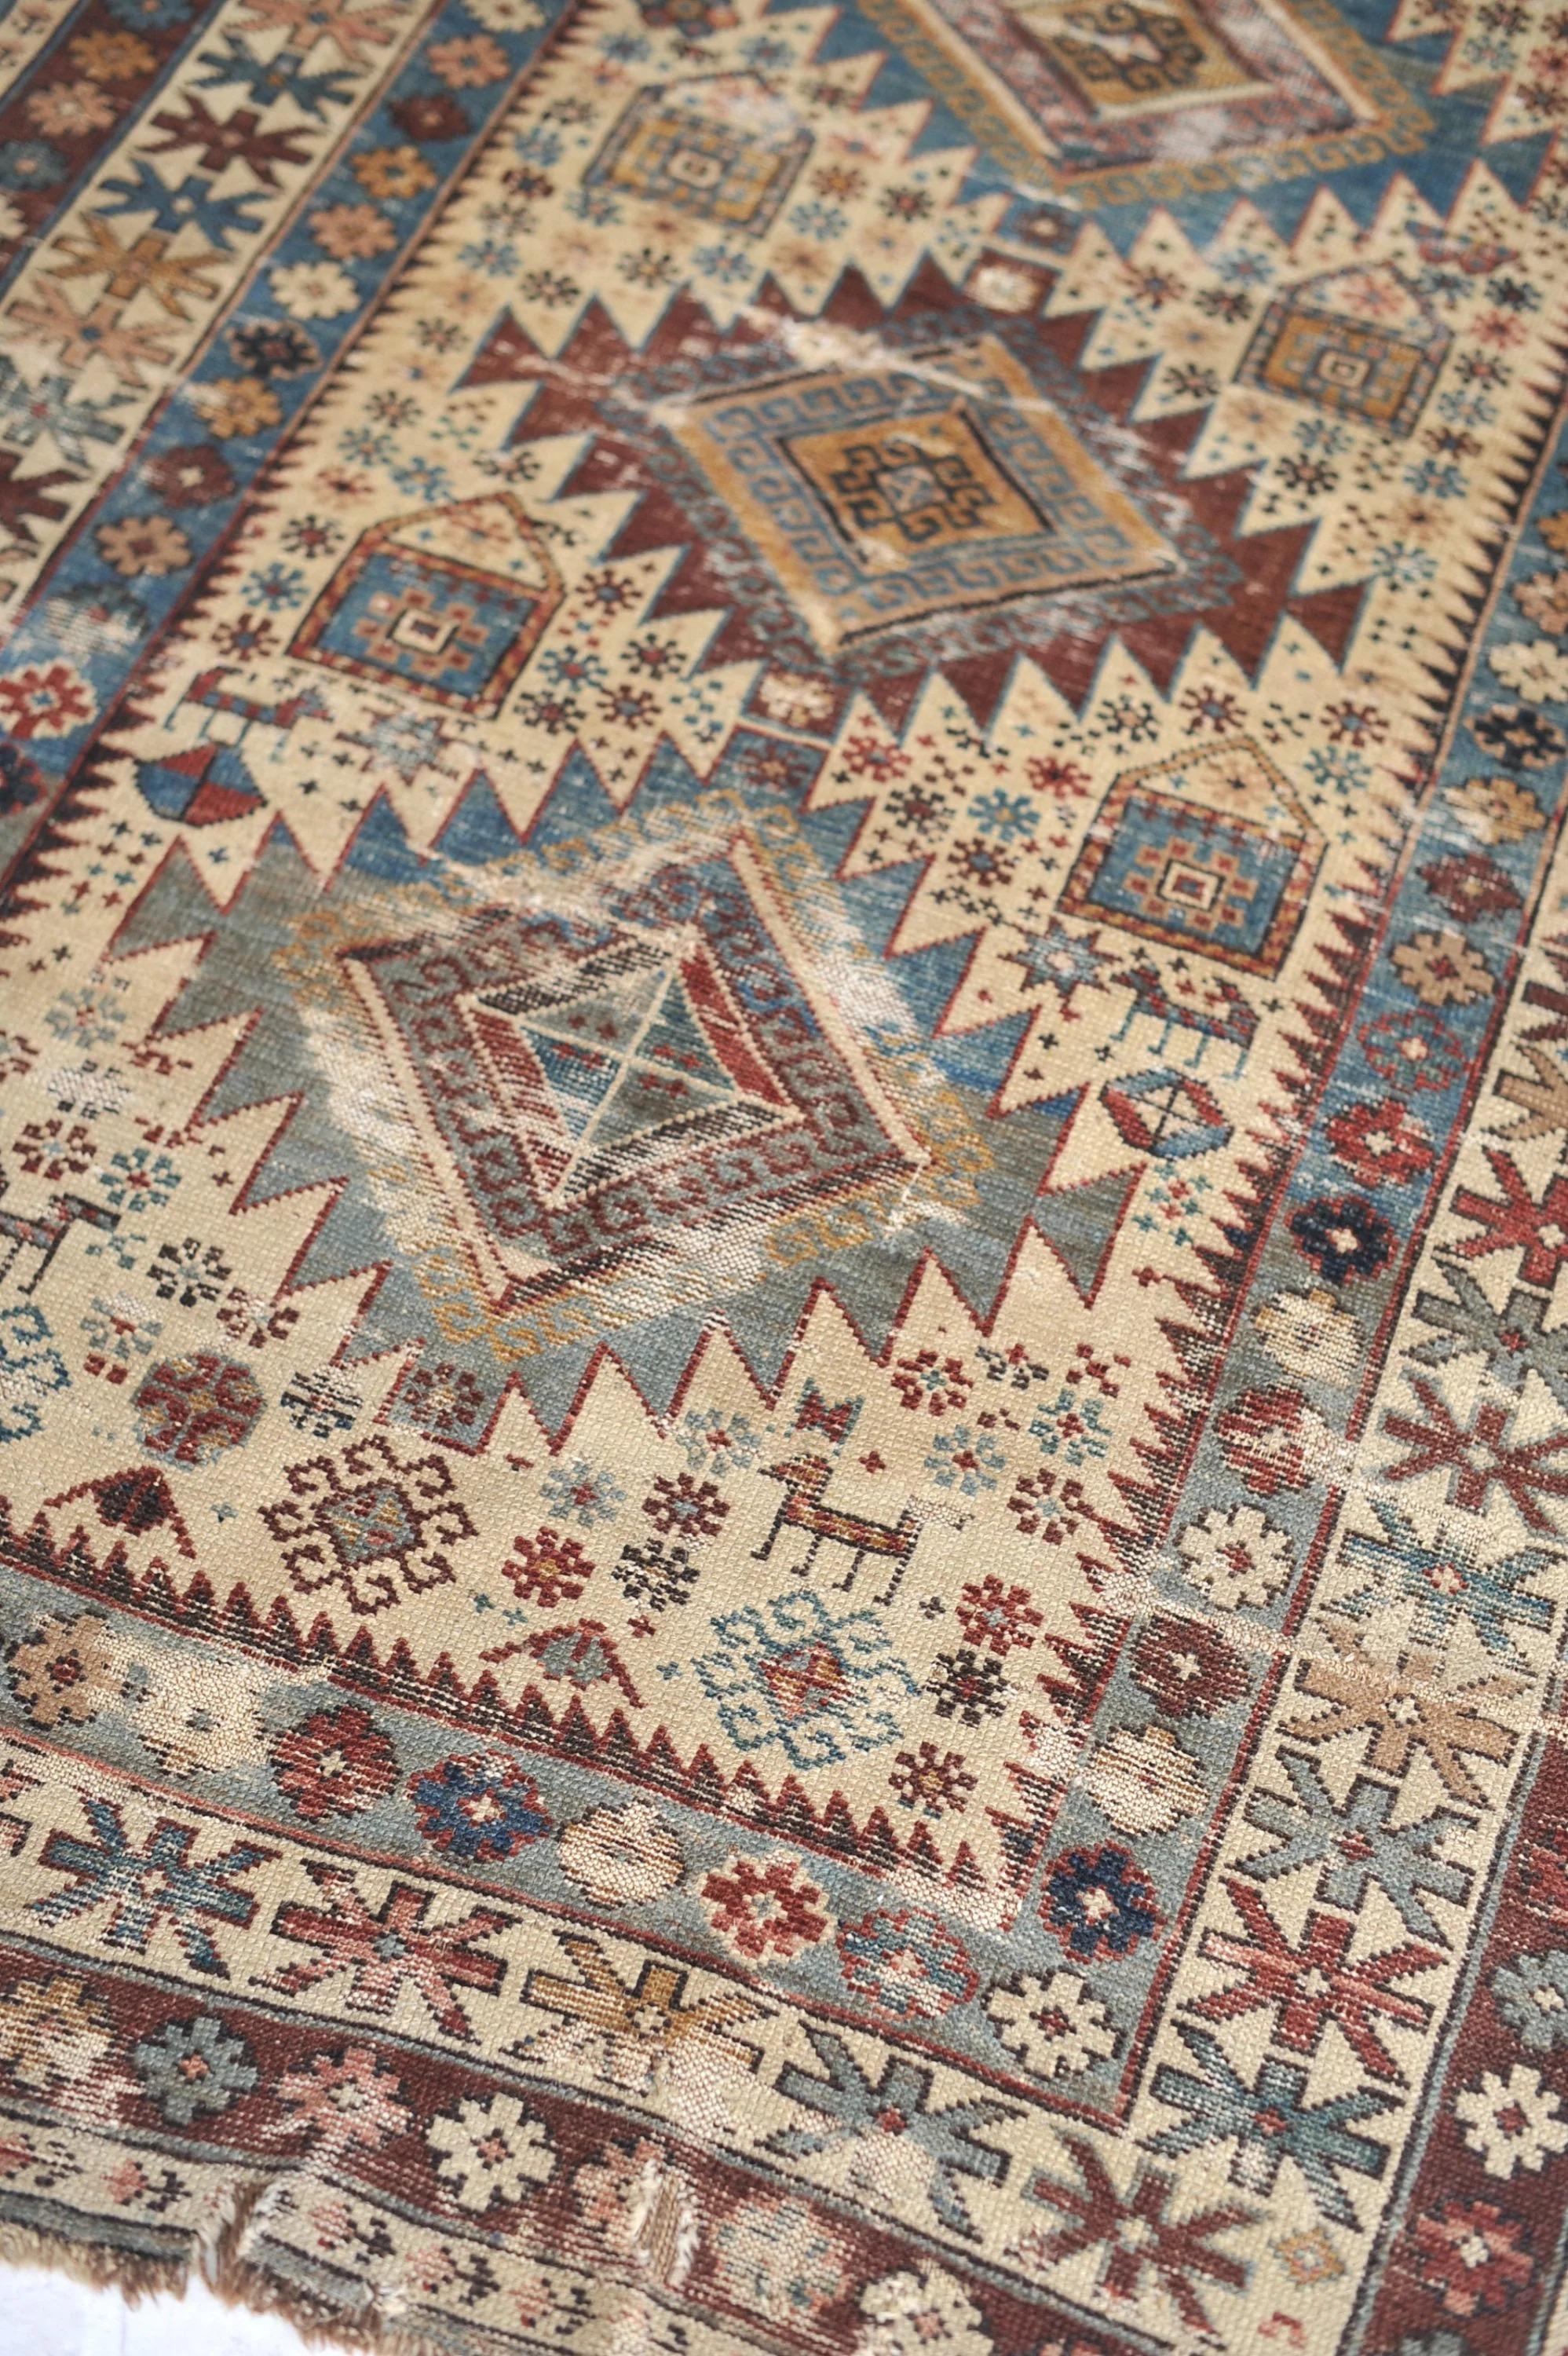 Ophelia Beautiful Mix of Tribal  Geometric & Bohemian  Floral Design  Ophelia Fine Antique Shirvan Caucasian Rug, circa 1890

Size: 3.5 x 4.11
Age: Circa 1890
Pile: Low. A lot of wear and tear. Thread bare in spots. Small holes and antique